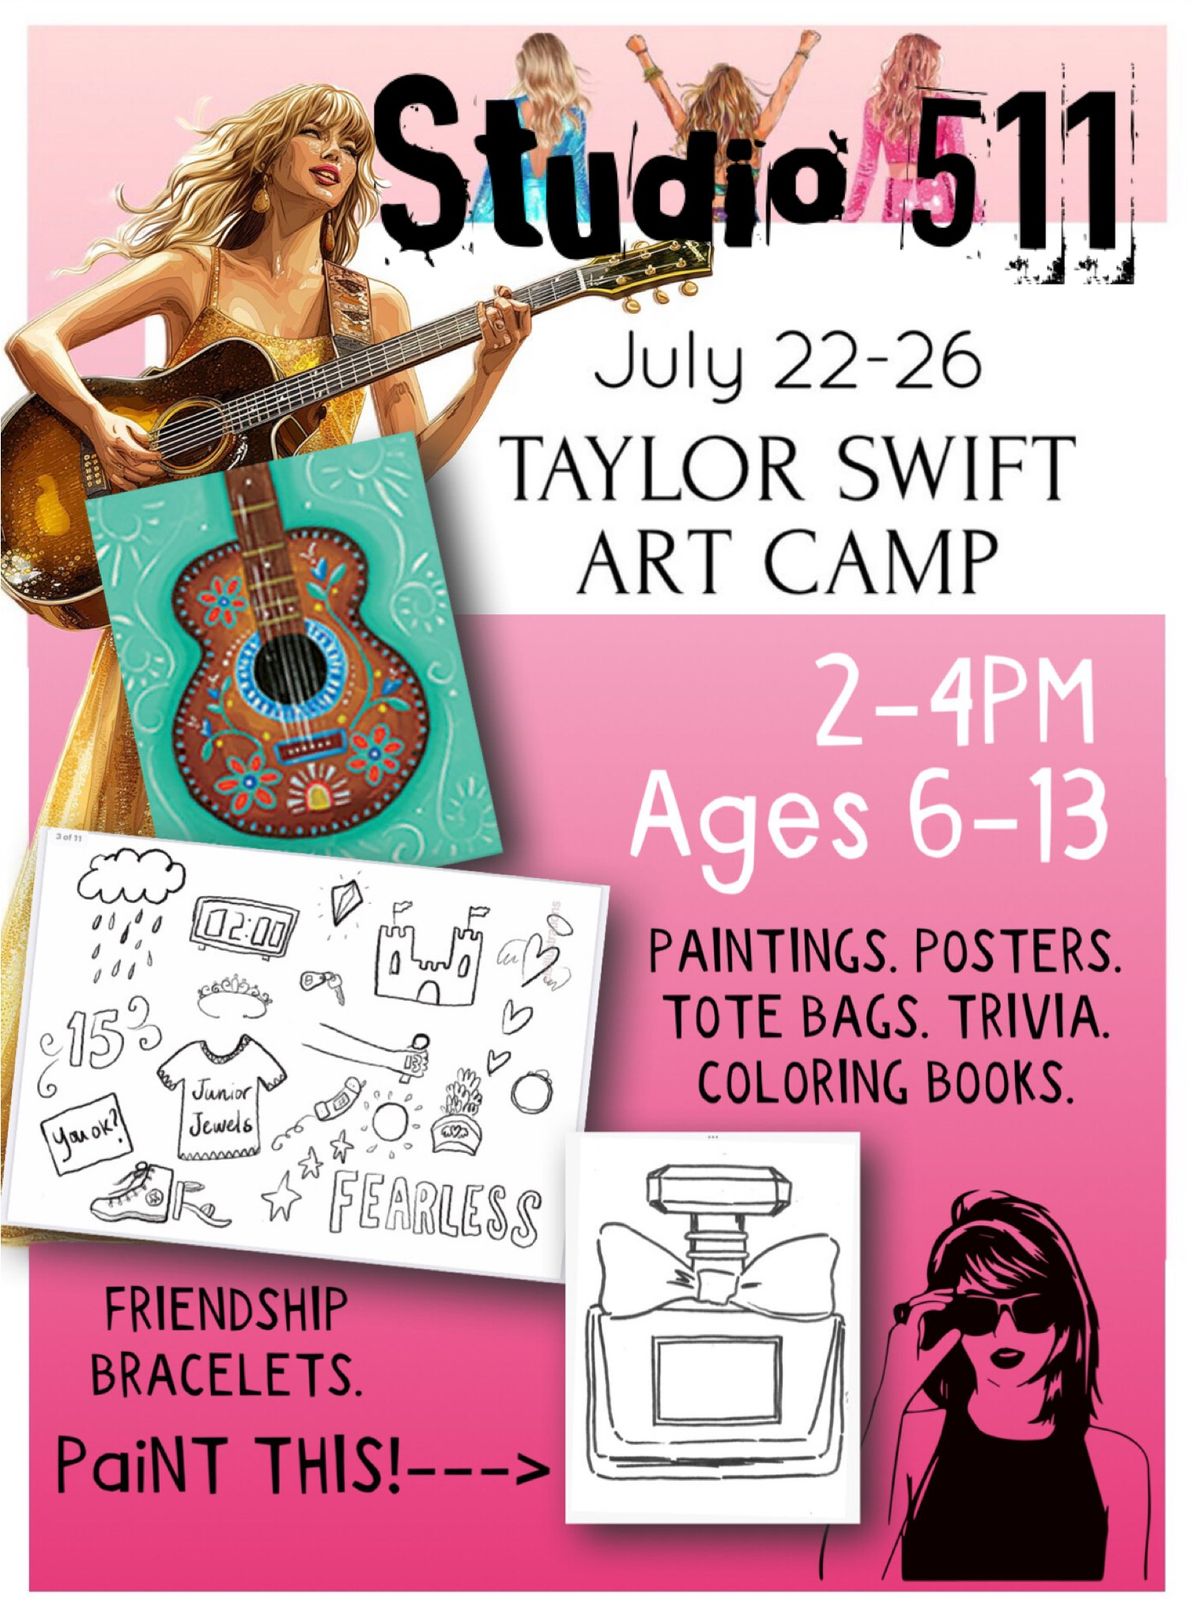 AFTERNOON Taylor Swift Art Camp